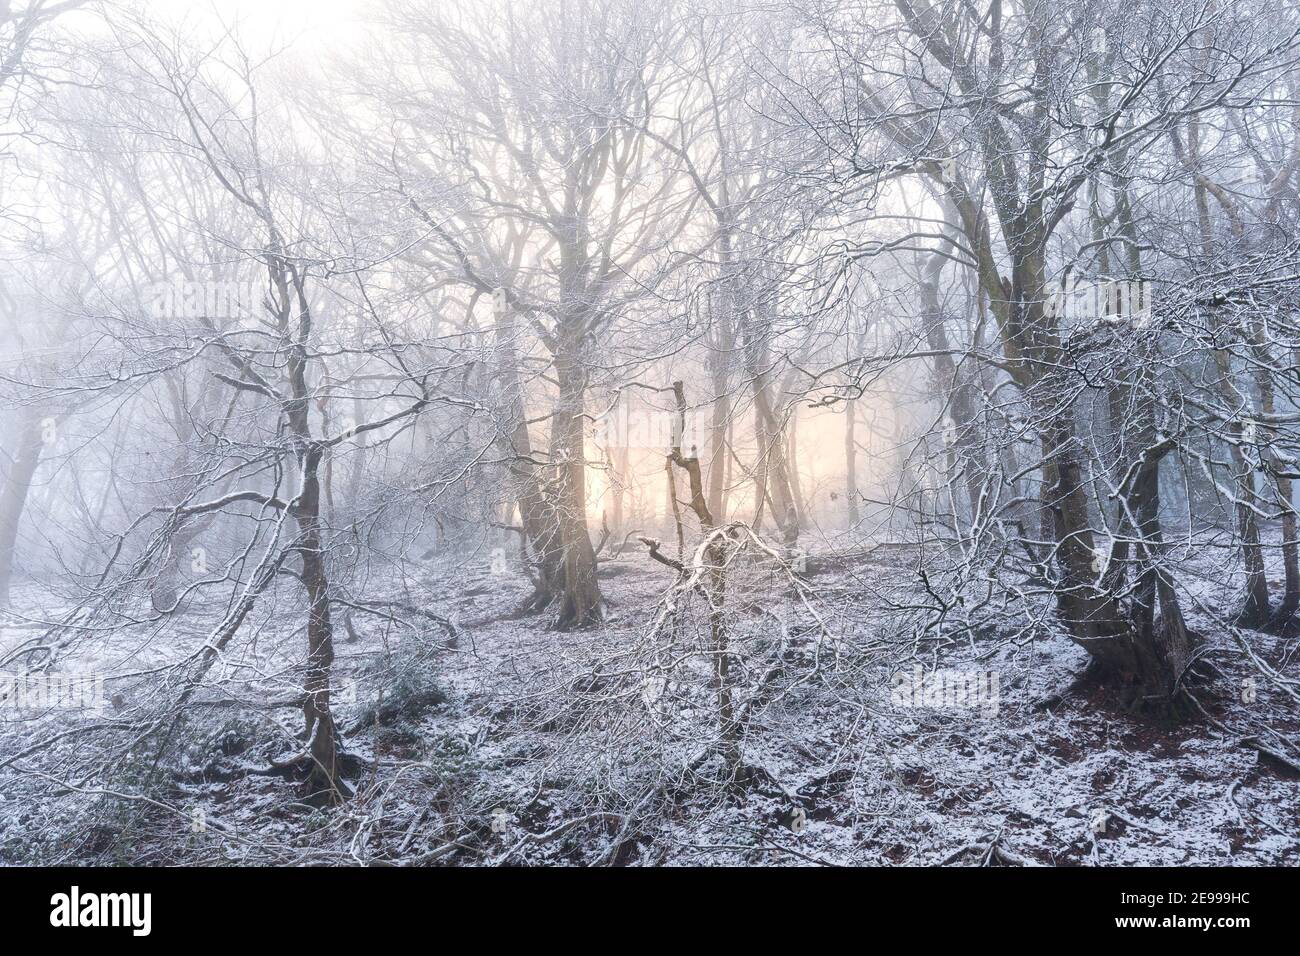 Trees in winter snow and mist with the sun shining through, Llanfoist, Wales, UK Stock Photo